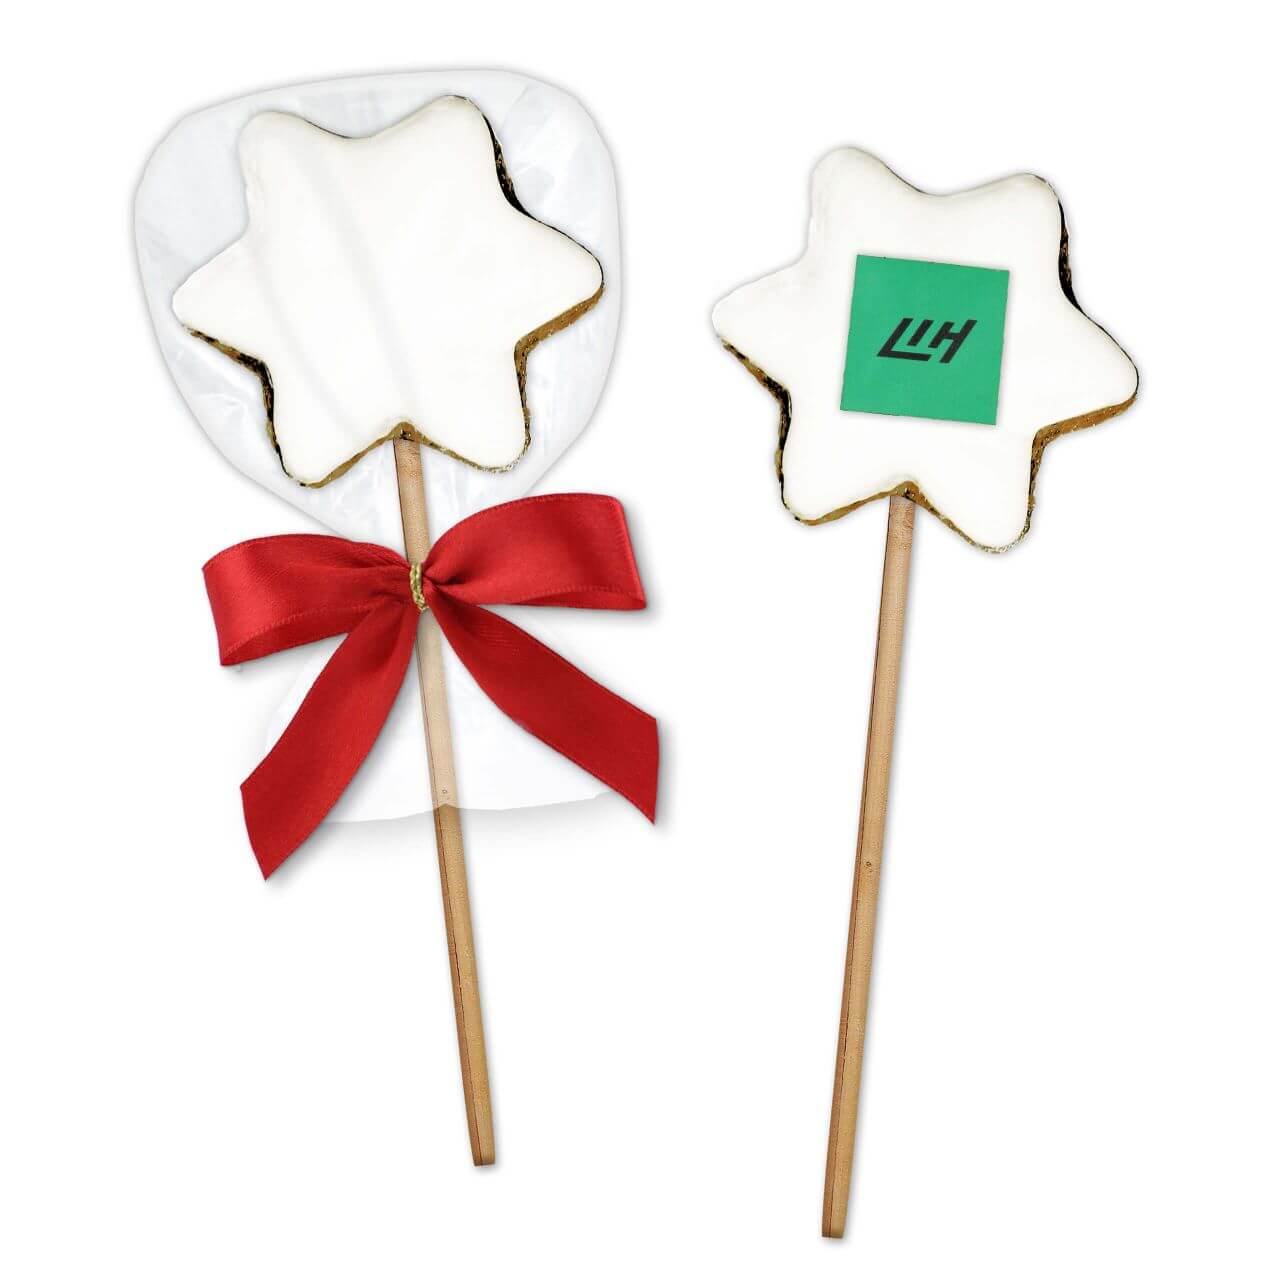 Cinnamon-Star Cake-Pop - on request with company logo